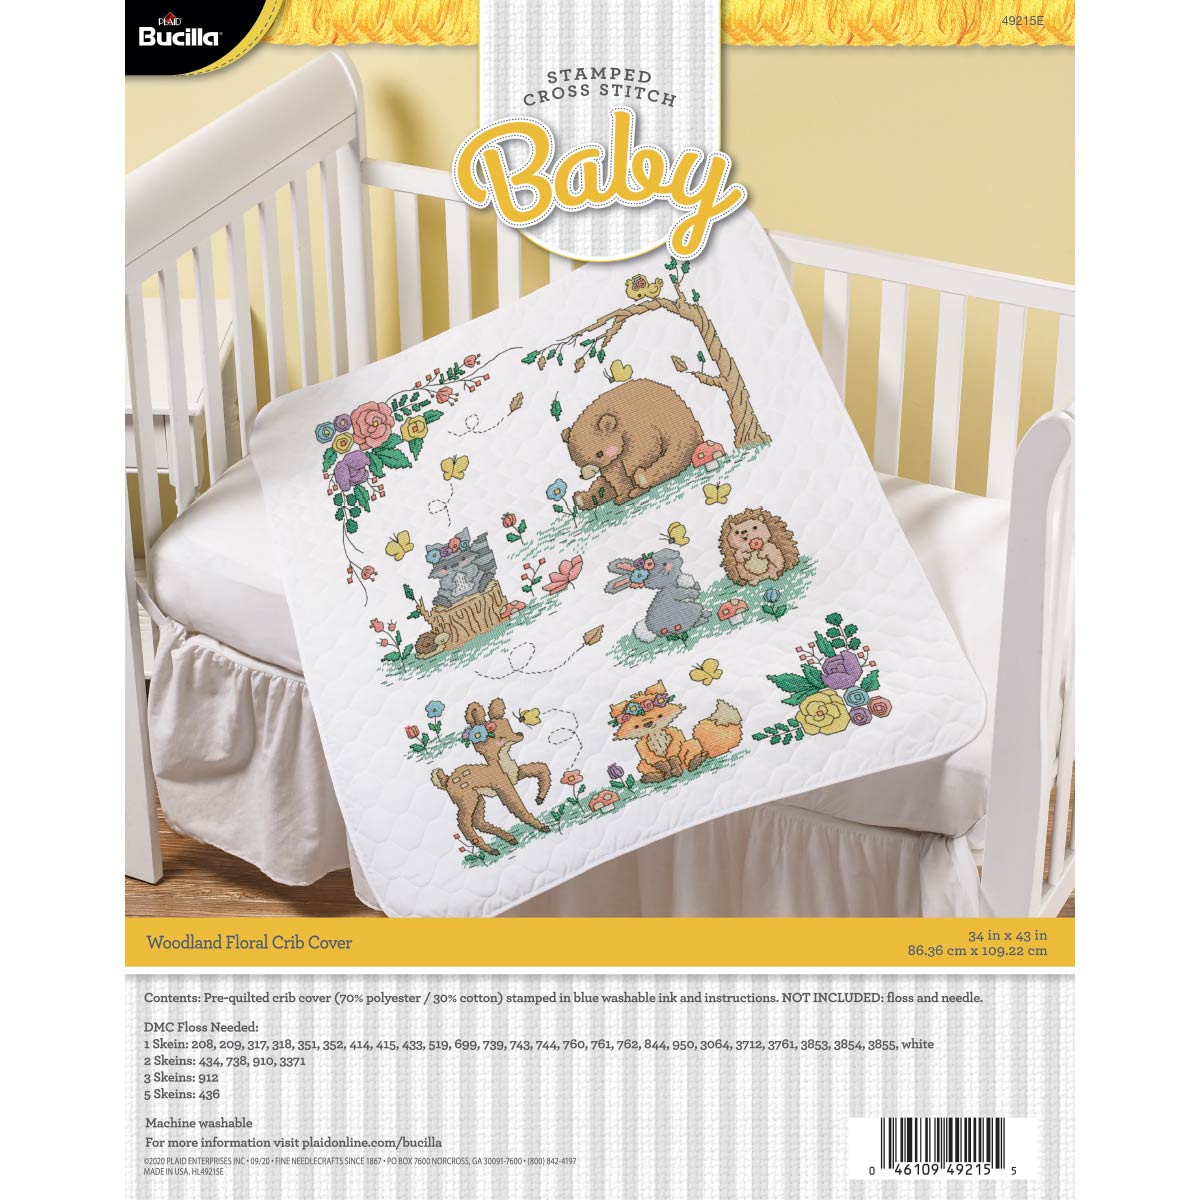 Up Up and Away Bucilla 47876E Stamped Cross Stitch Baby Crib Cover 